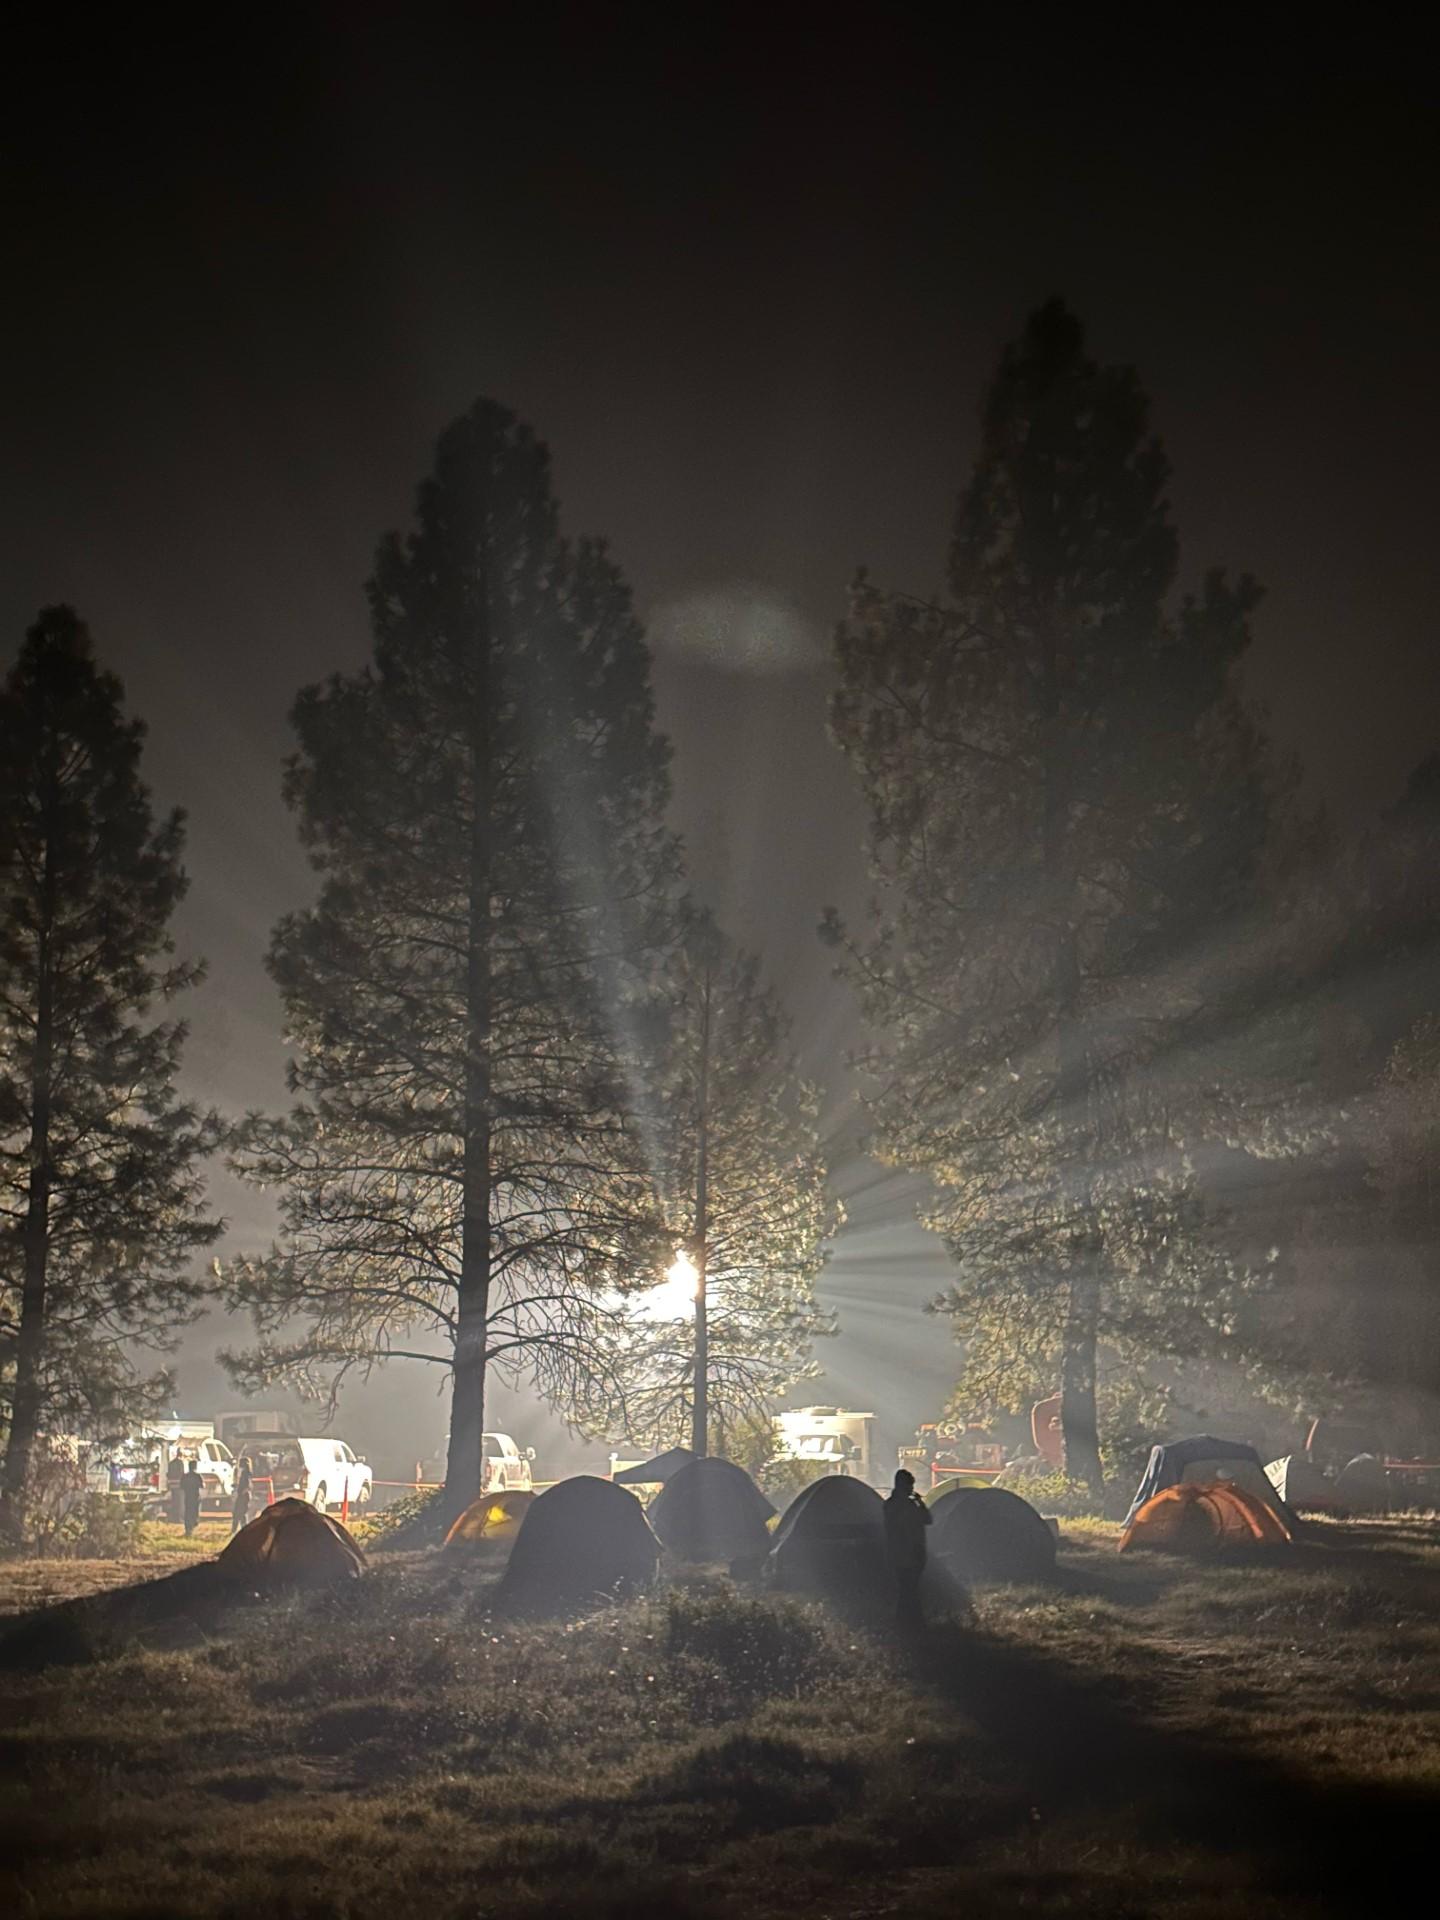 Image of tents at night with the lights shining through the trees in the Happy Camp Fire Camp. Photo USDA Forest Service courtesy Mike Spaulding